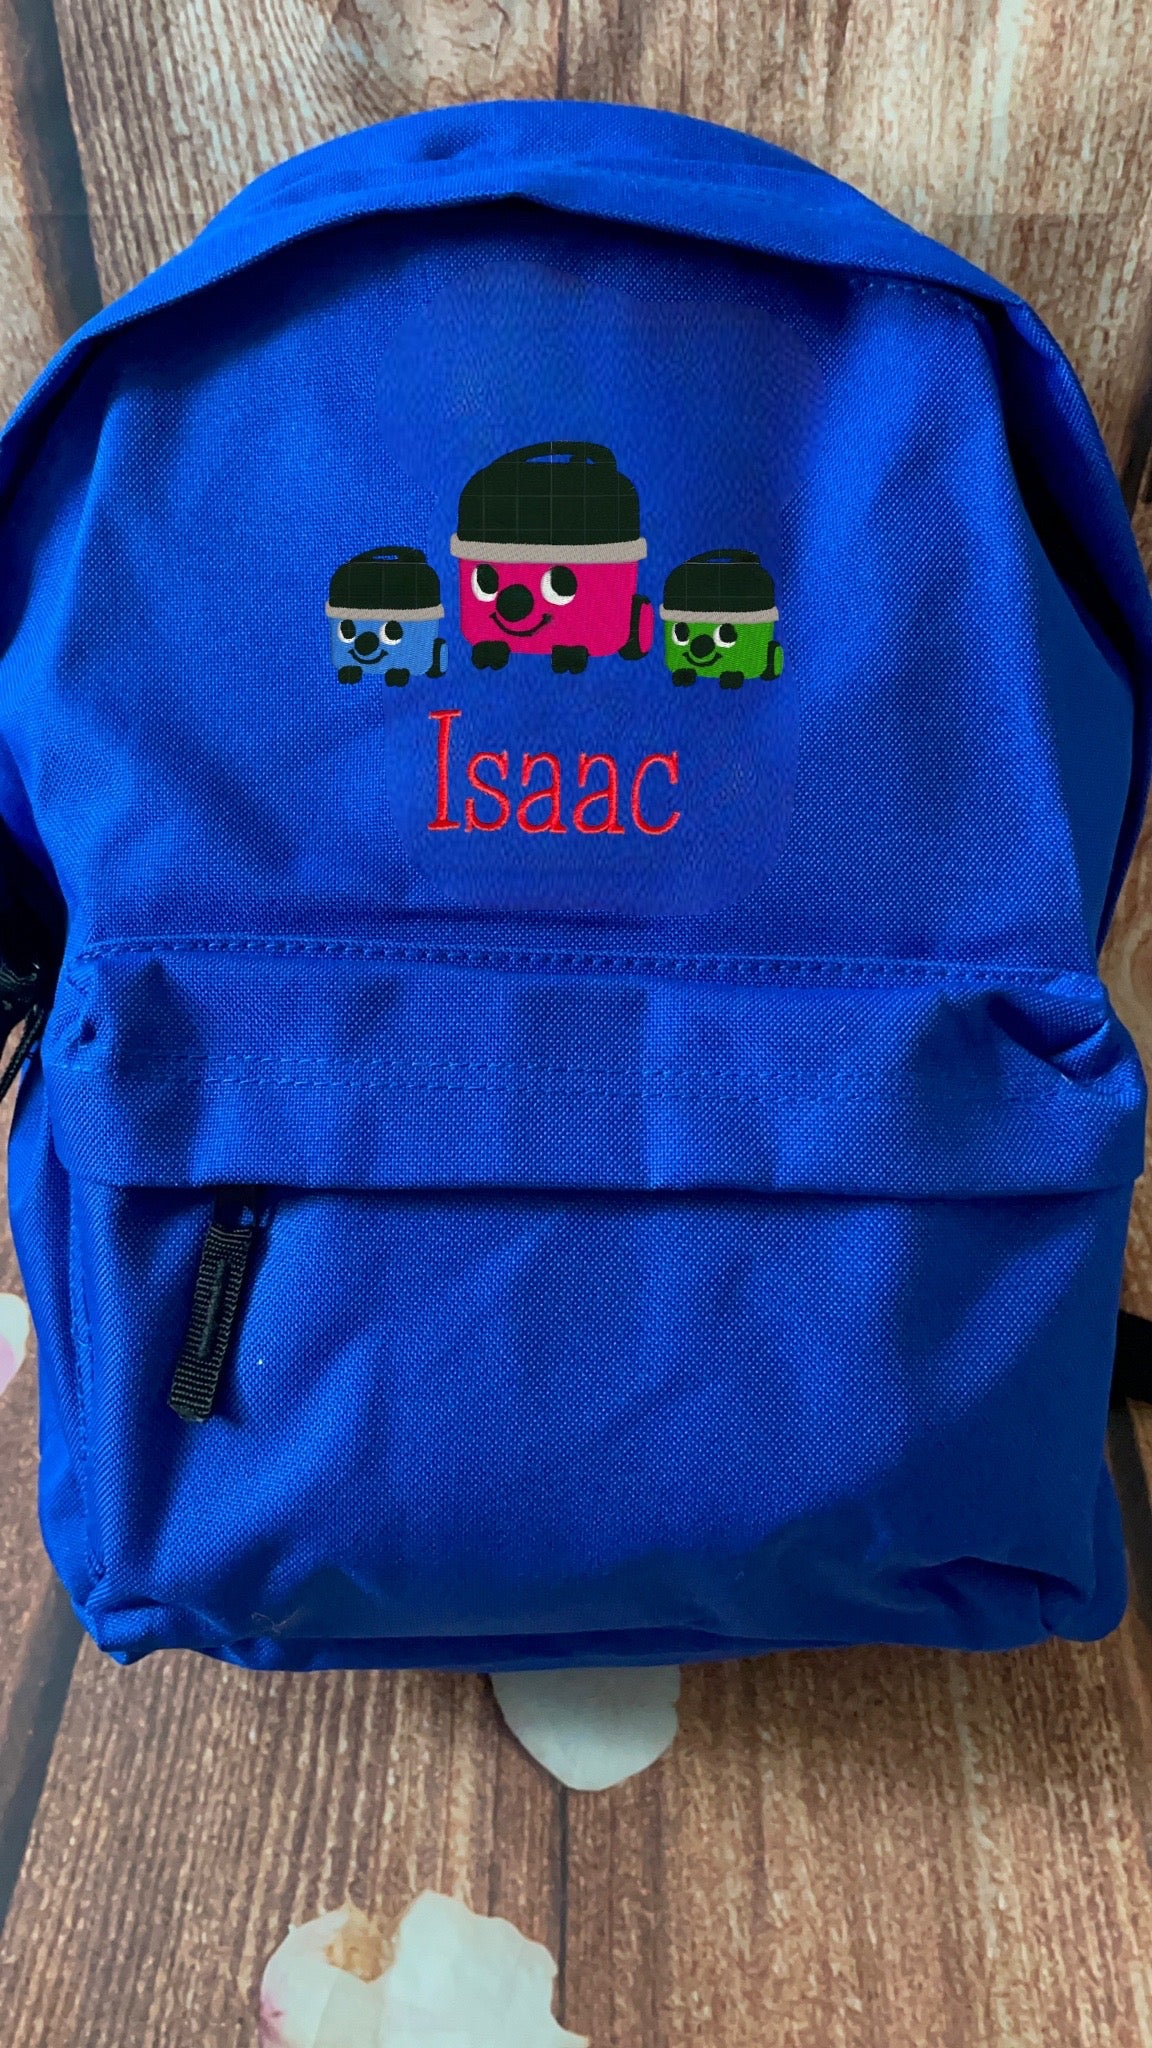 NEW DESIGN Hoover Rucksack personalised with embroidered name. Backpack ideal for Primary, Junior, Infant school bag. Choice of colours